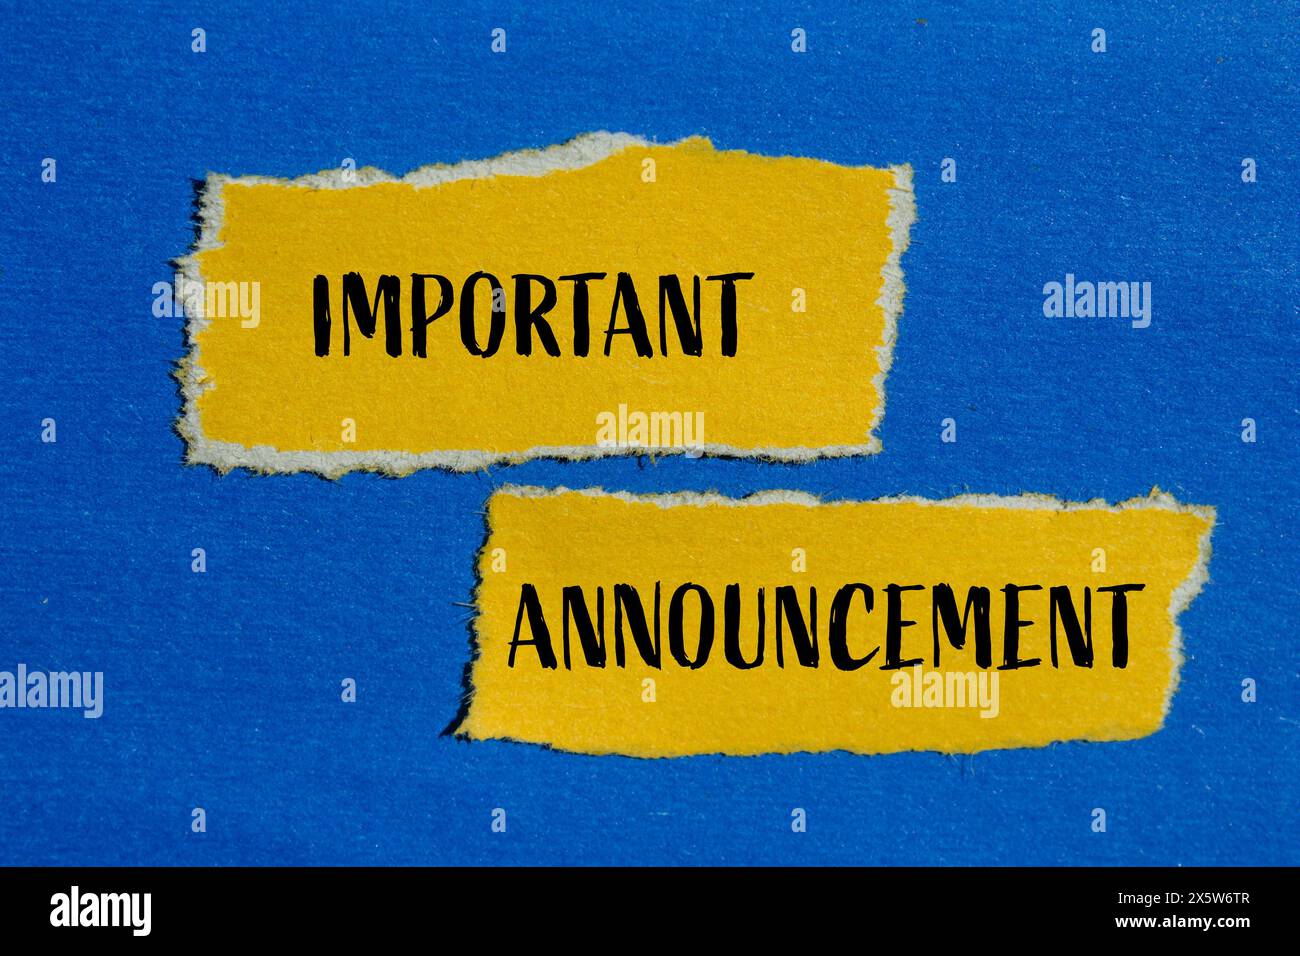 Important announcement words written on ripped yellow paper pieces with blue background. Conceptual important announcement symbol. Copy space. Stock Photo